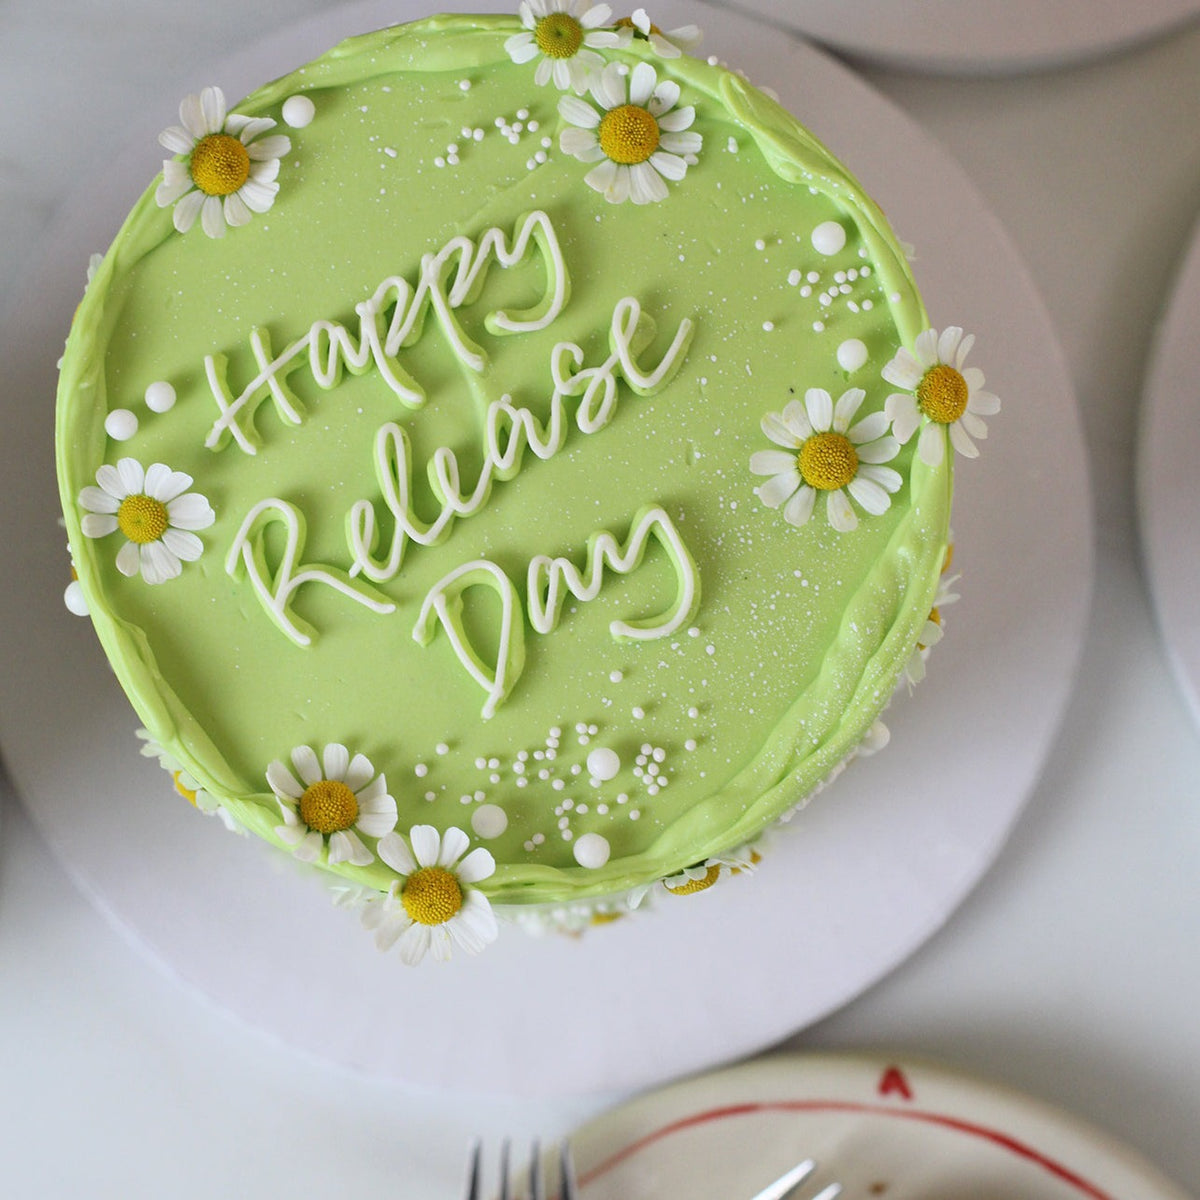 Daisy Days cake in green with hand piped msg